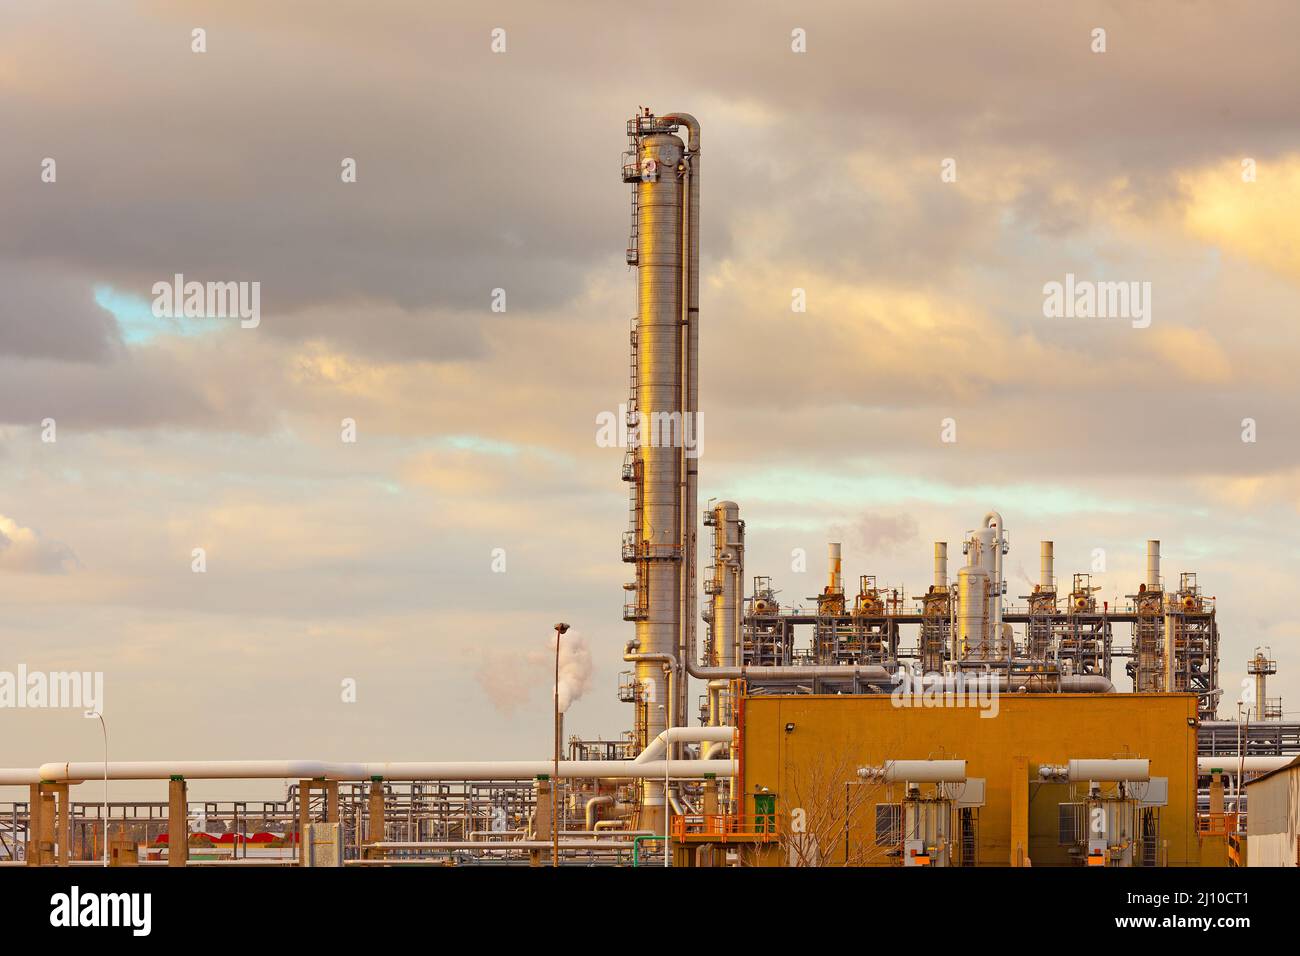 Detail at sunset of a Natural Gas refinery plant Stock Photo